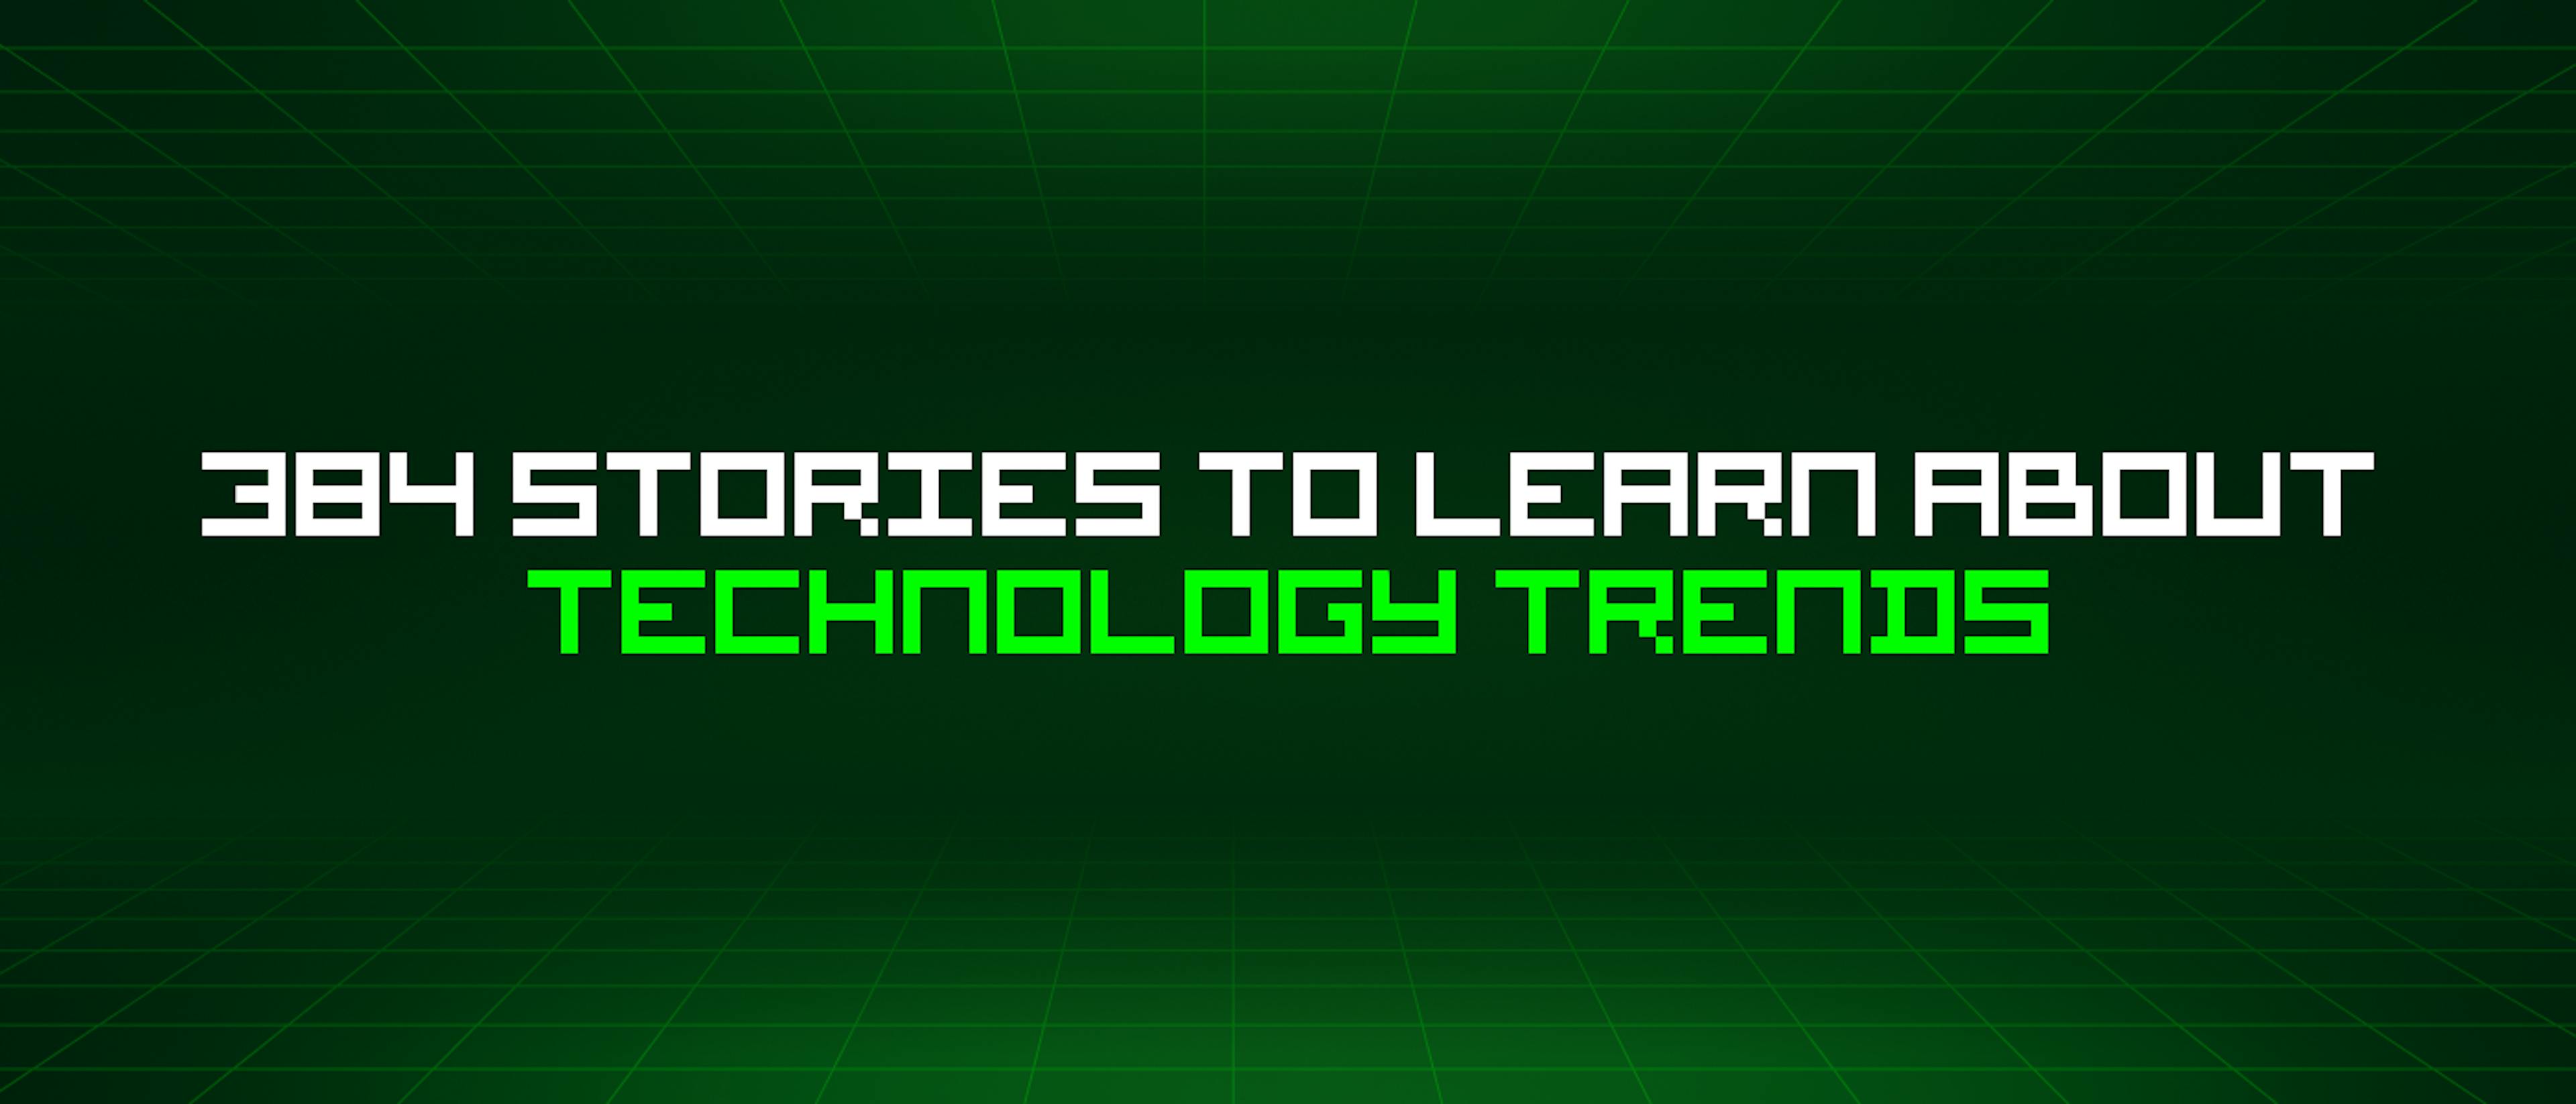 featured image - 384 Stories To Learn About Technology Trends